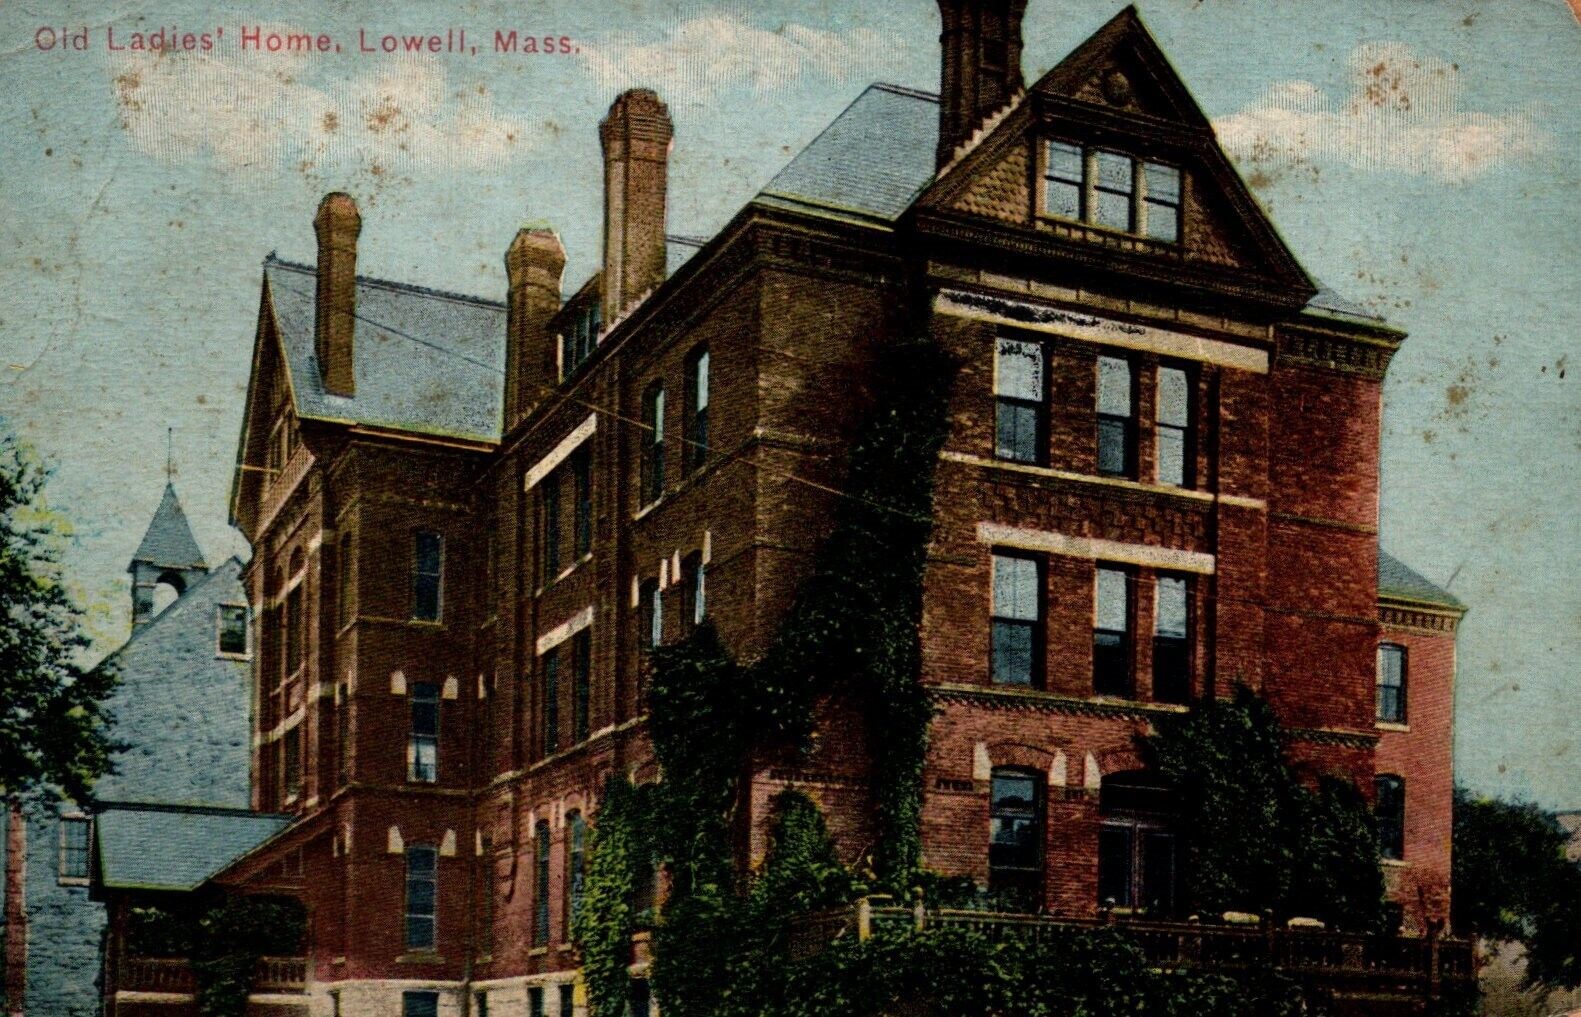 Lowell Massachusetts Old Ladies' Home Antique PC Posted 1910